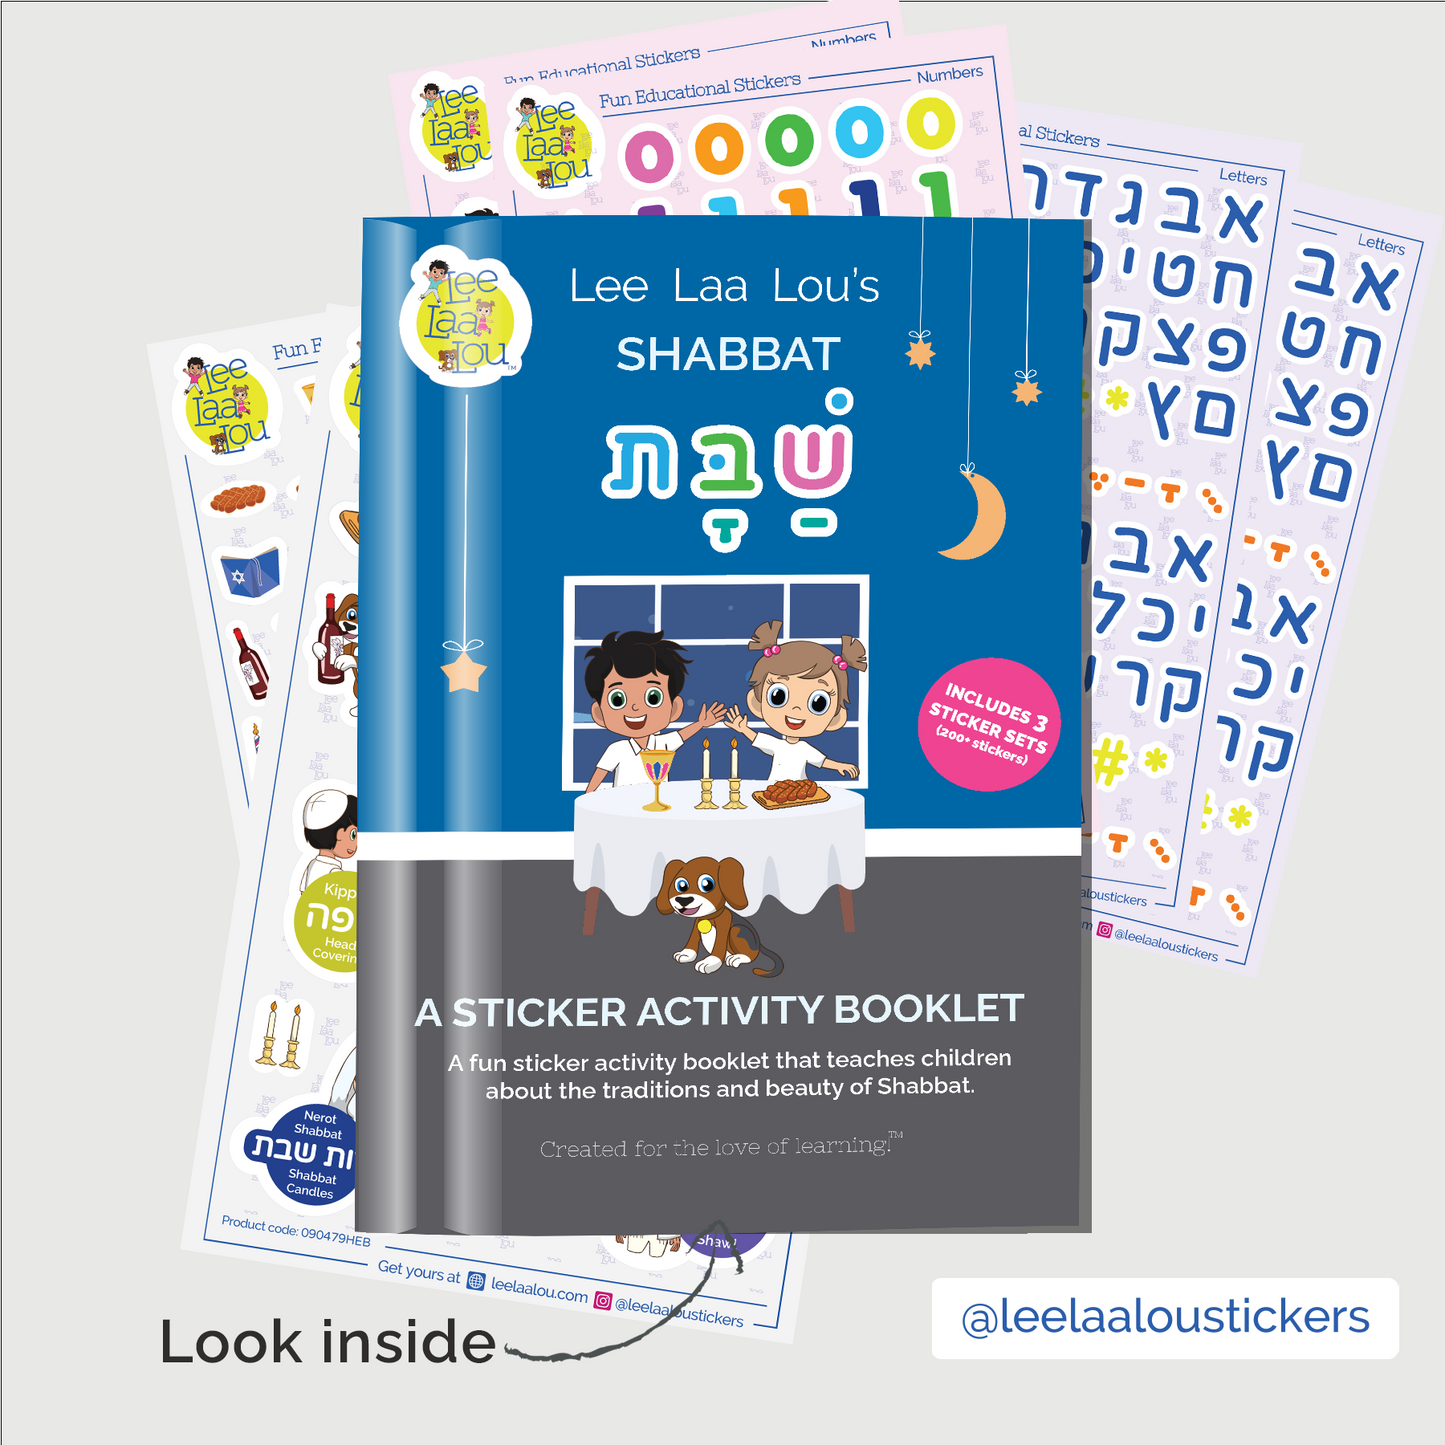 Shabbat sticker activity booklet. Shabbat and kiddush stickers. Learn about Shabbat. Learning activity for kids.